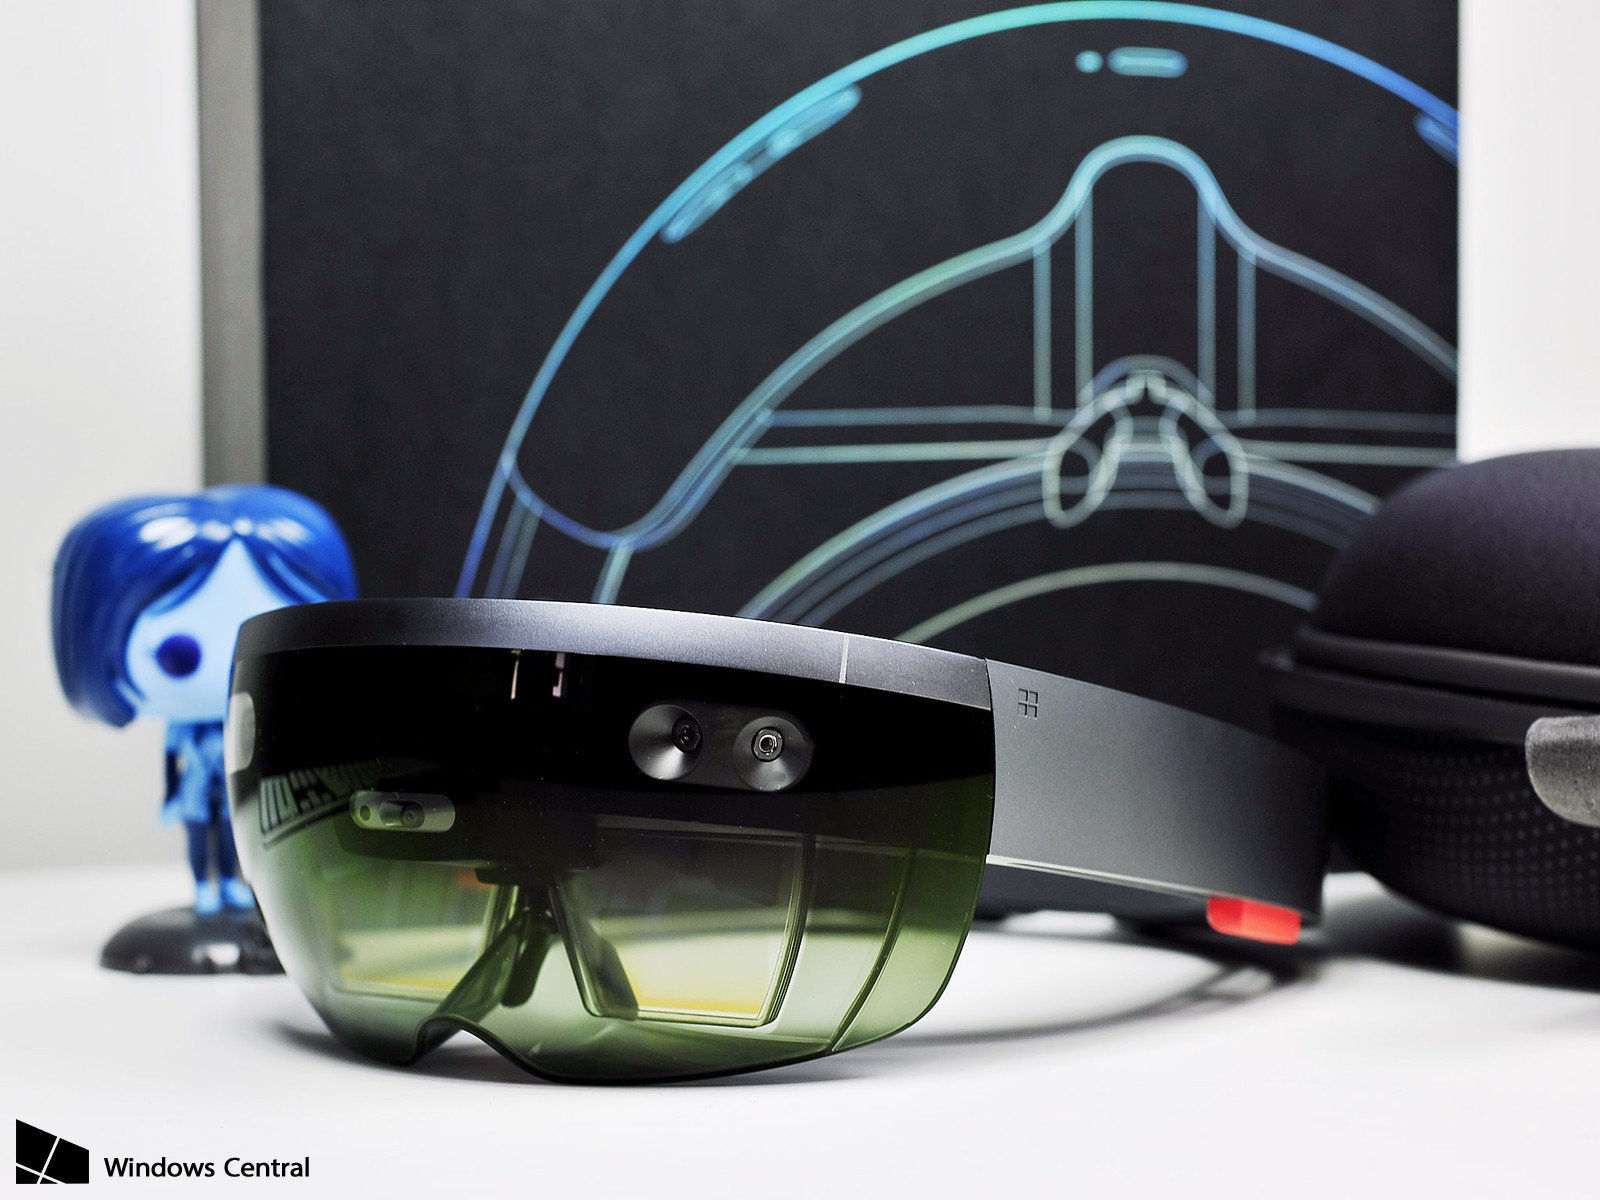 Microsoft secures $480 million contract with U.S. Army for HoloLens headsets